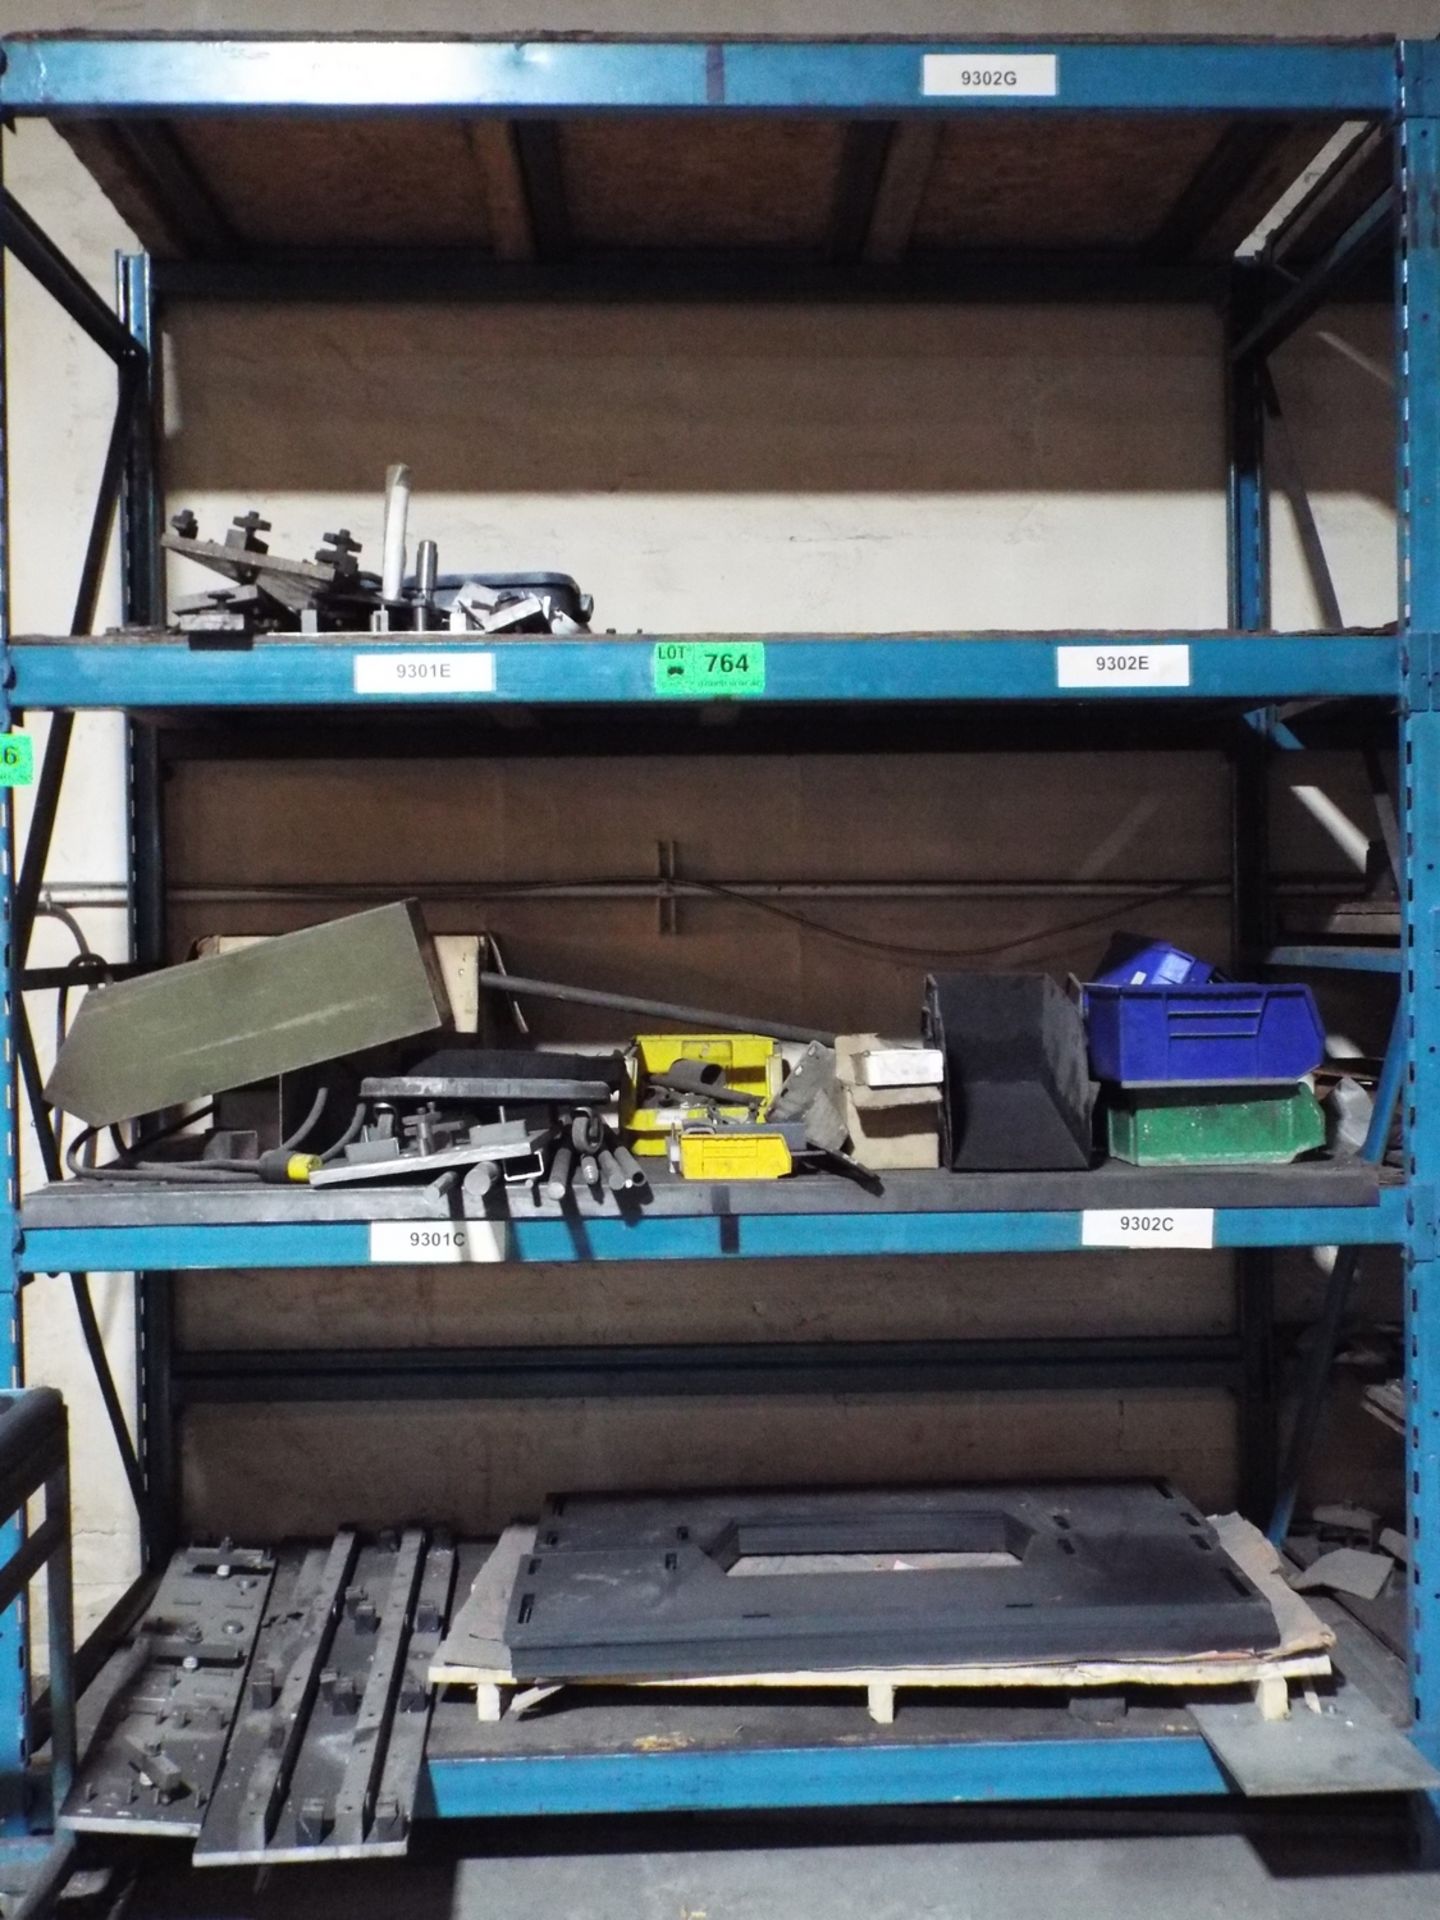 LOT/ CONTENTS OF RACK - FIXTURES, JIGS AND SPARE PARTS